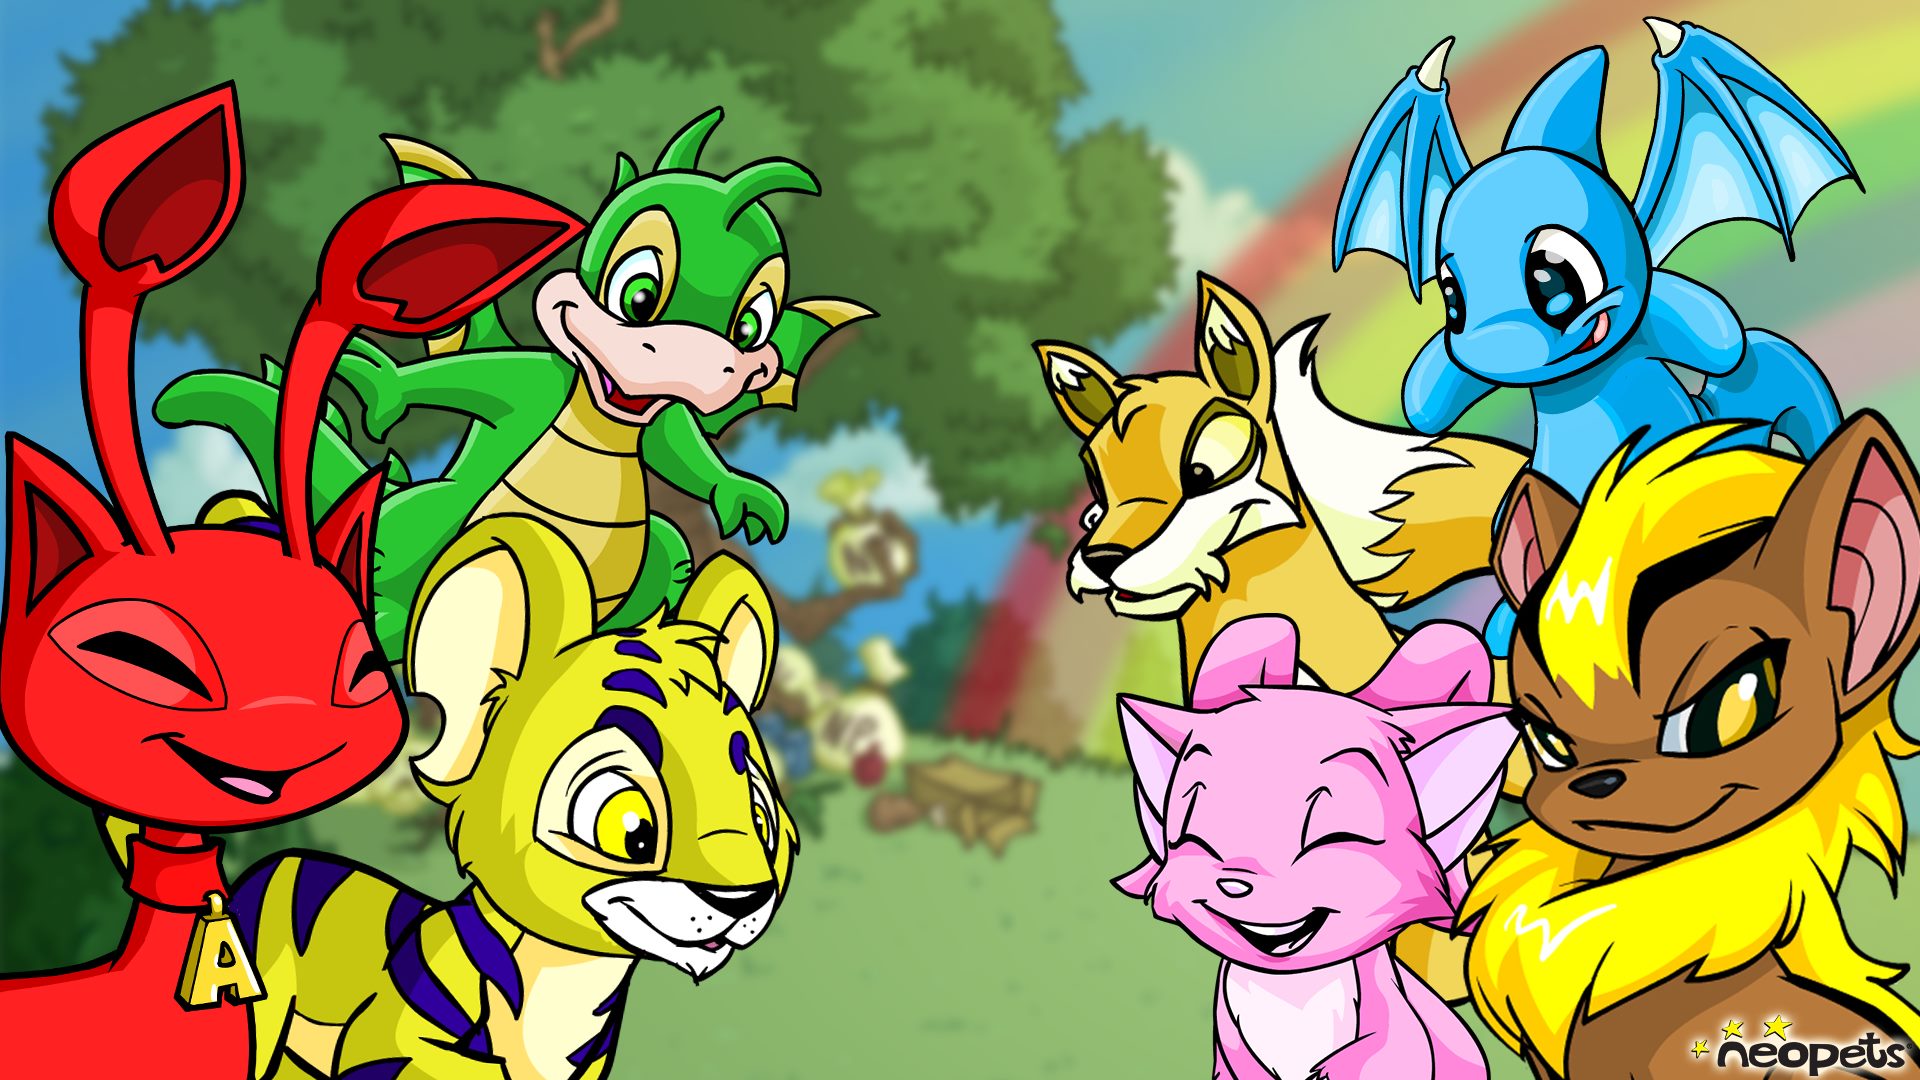 Neopets Background